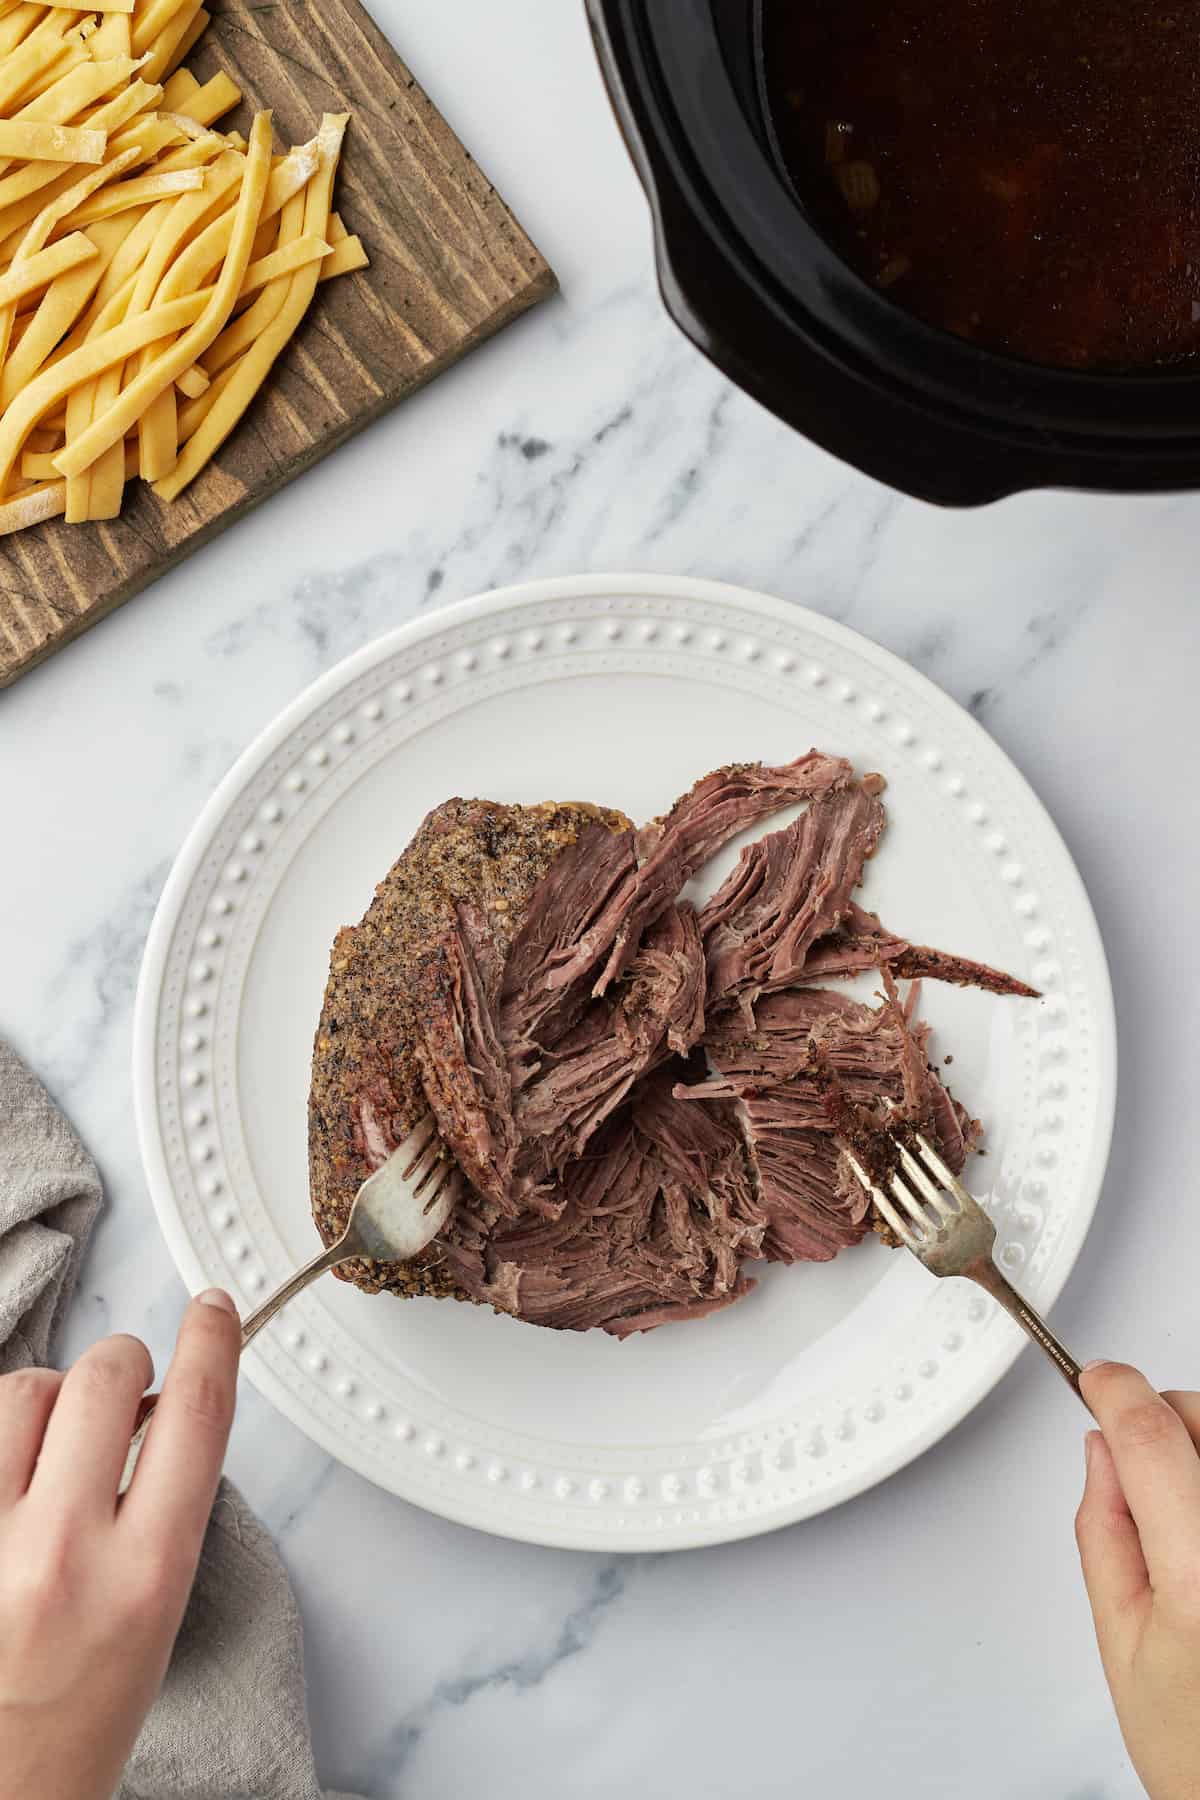 Two forks being used to shred up the slow-cooked chuck roast